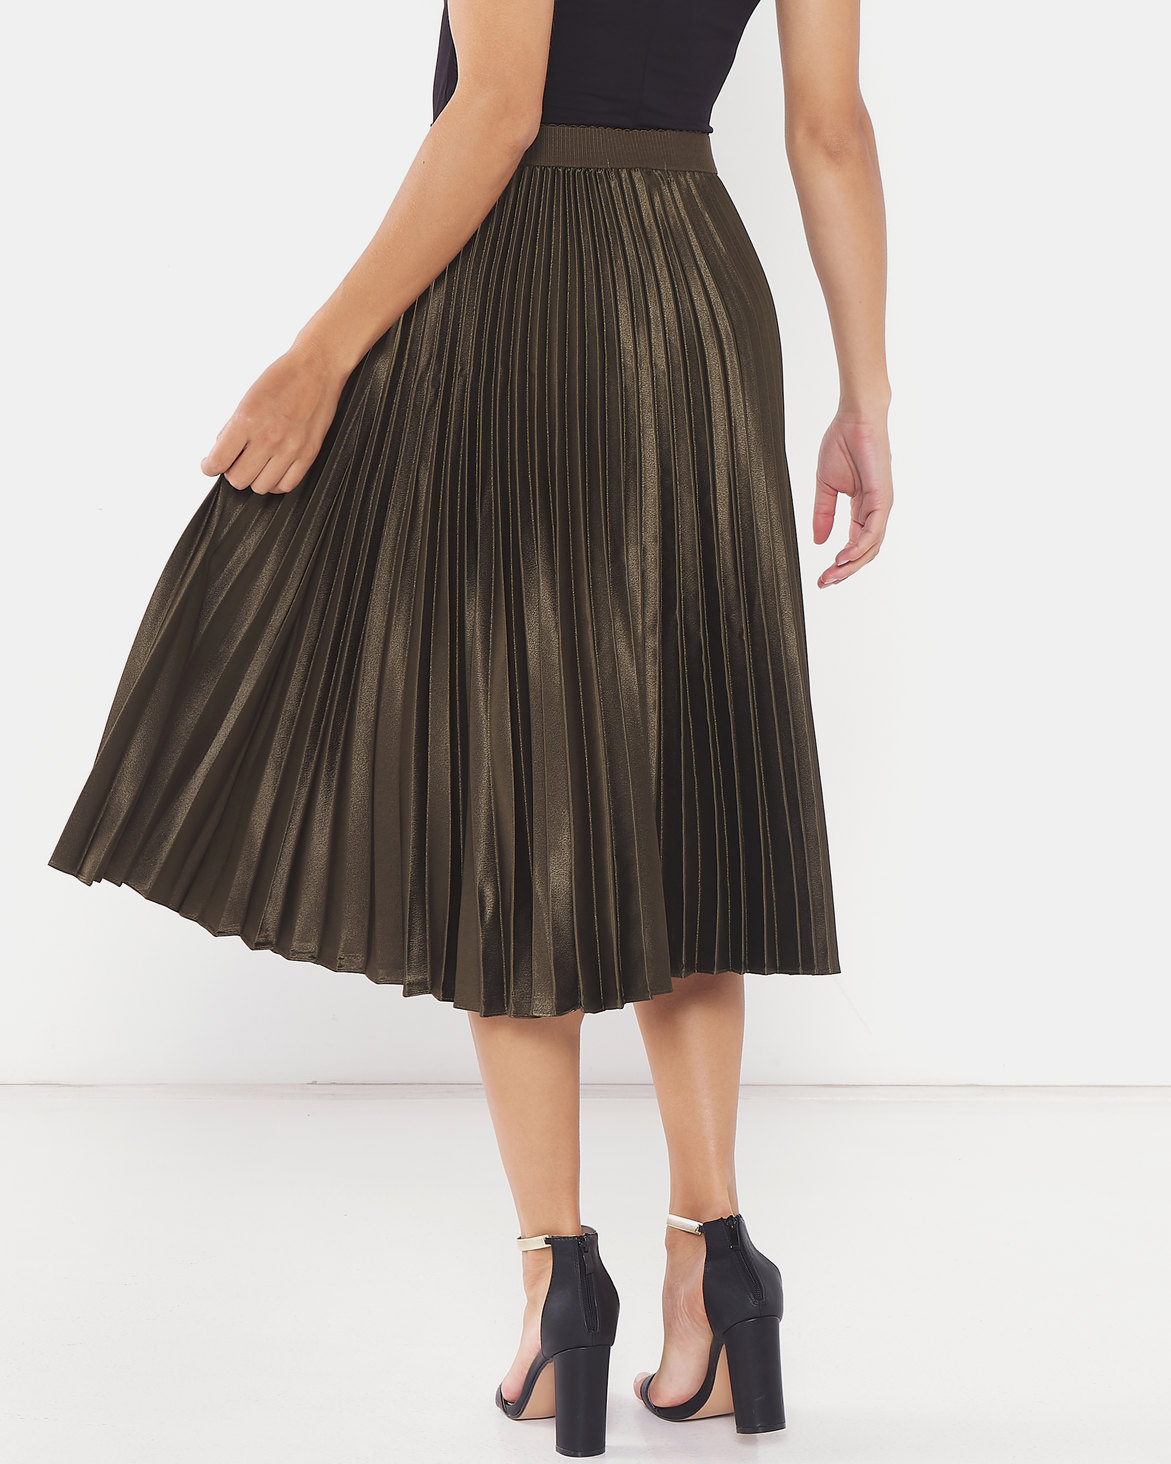 Miss Cassidy By Queenspark Pleated Satin Woven Skirt Fatigue | Zando